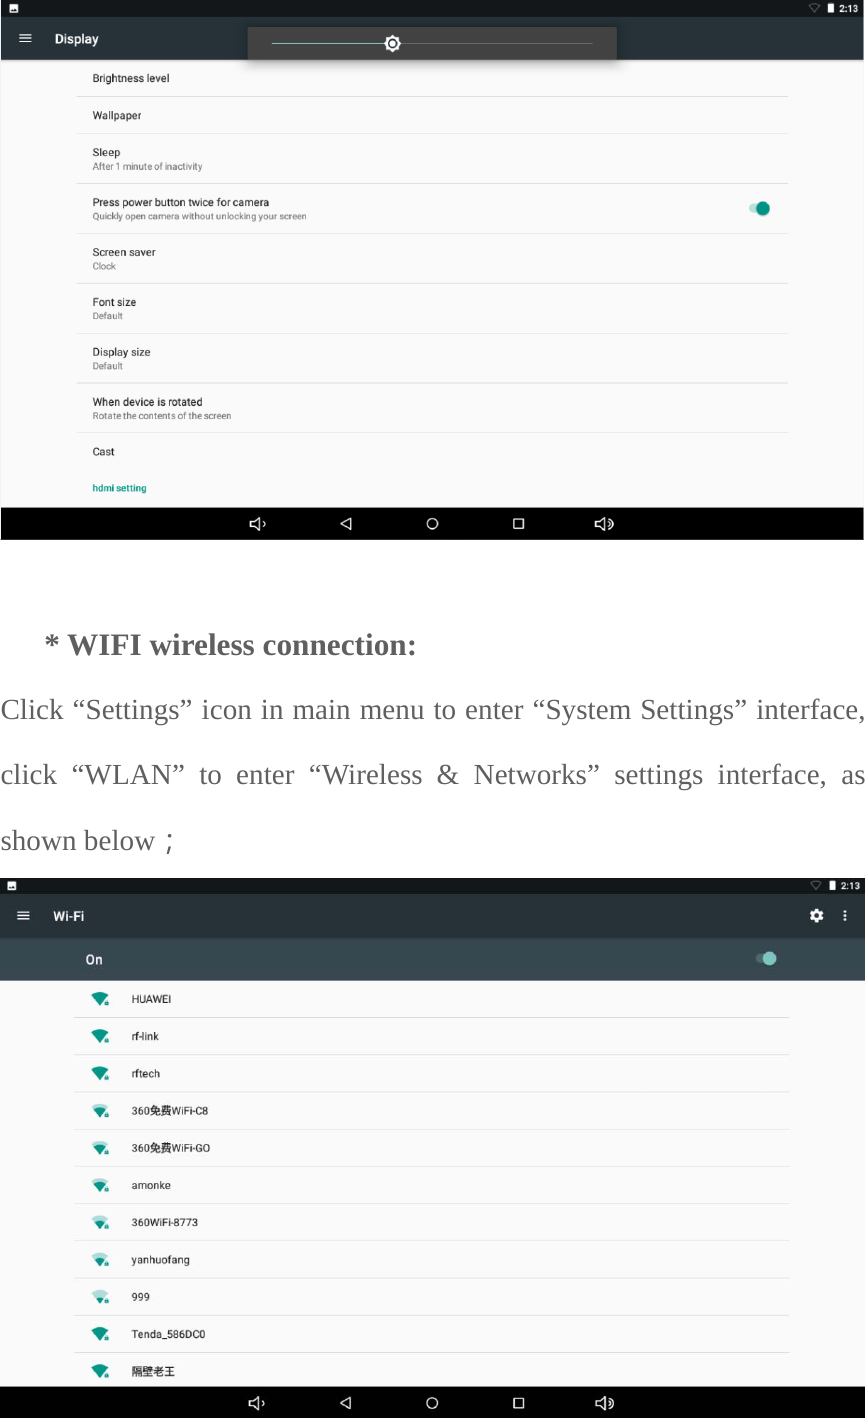  * WIFI wireless connection: Click “Settings” icon in main menu to enter “System Settings” interface, click “WLAN” to enter “Wireless &amp; Networks” settings interface, as shown below； 